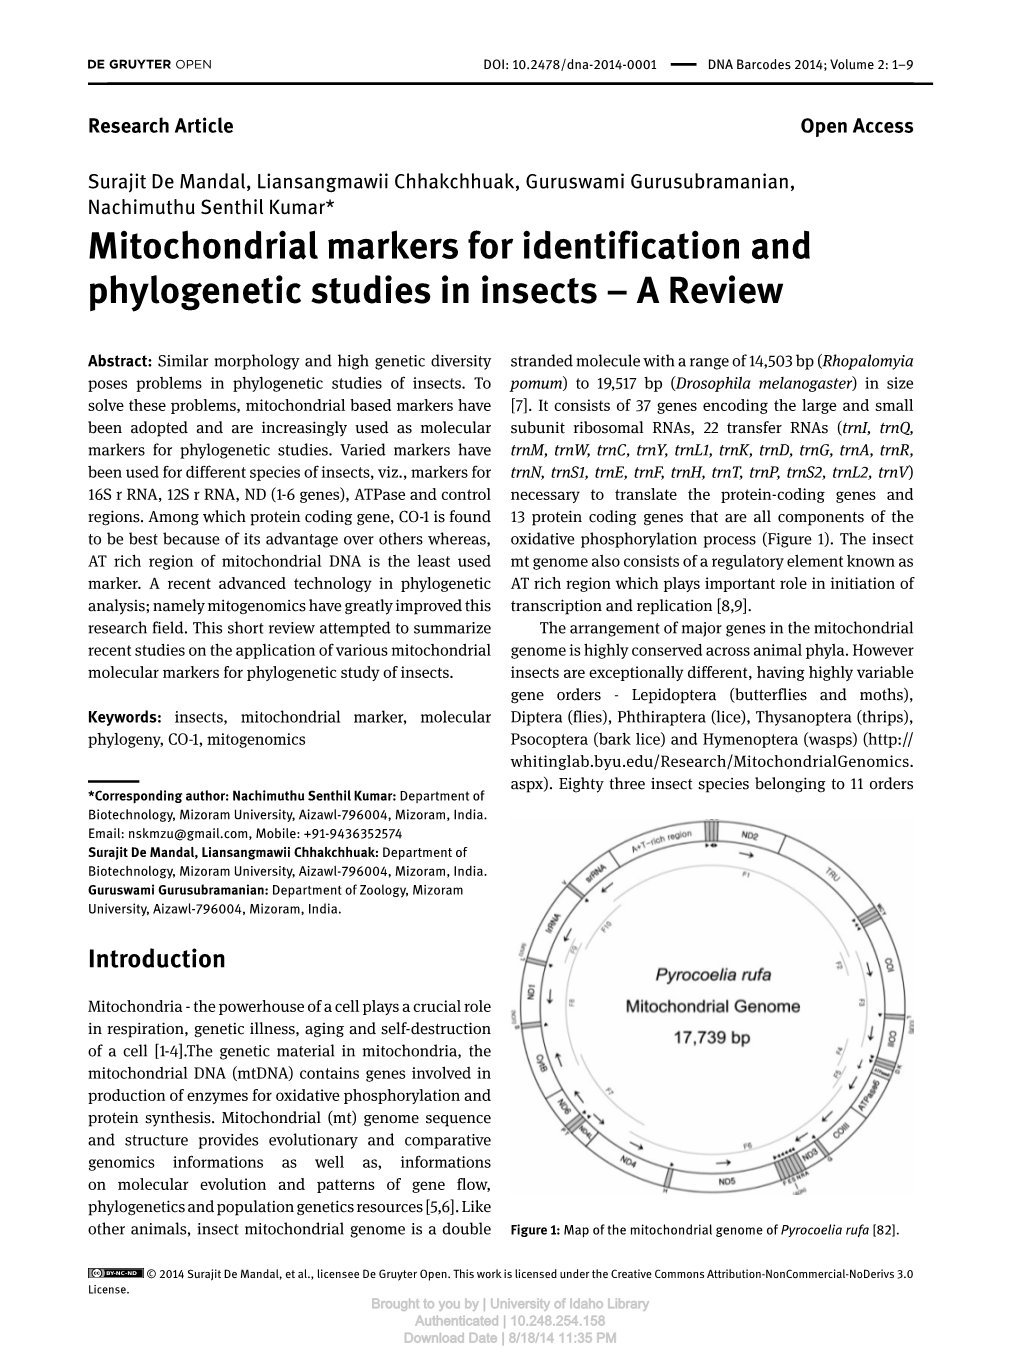 Mitochondrial Markers for Identification and Phylogenetic Studies in Insects – a Review